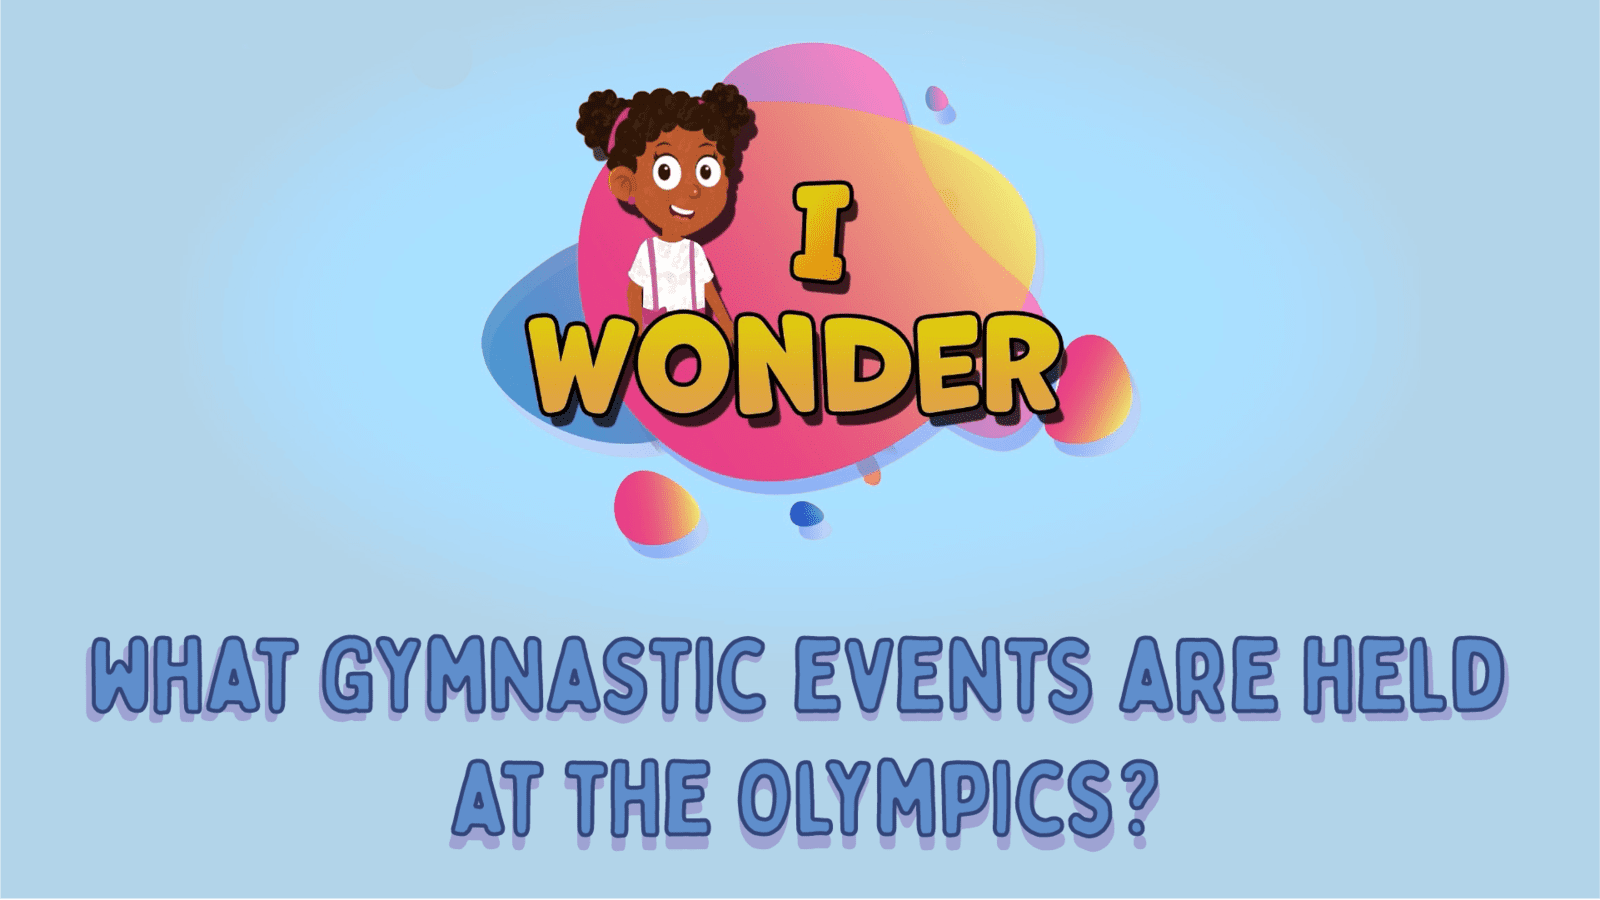 What Gymnastic Events Are Held At The Olympics?